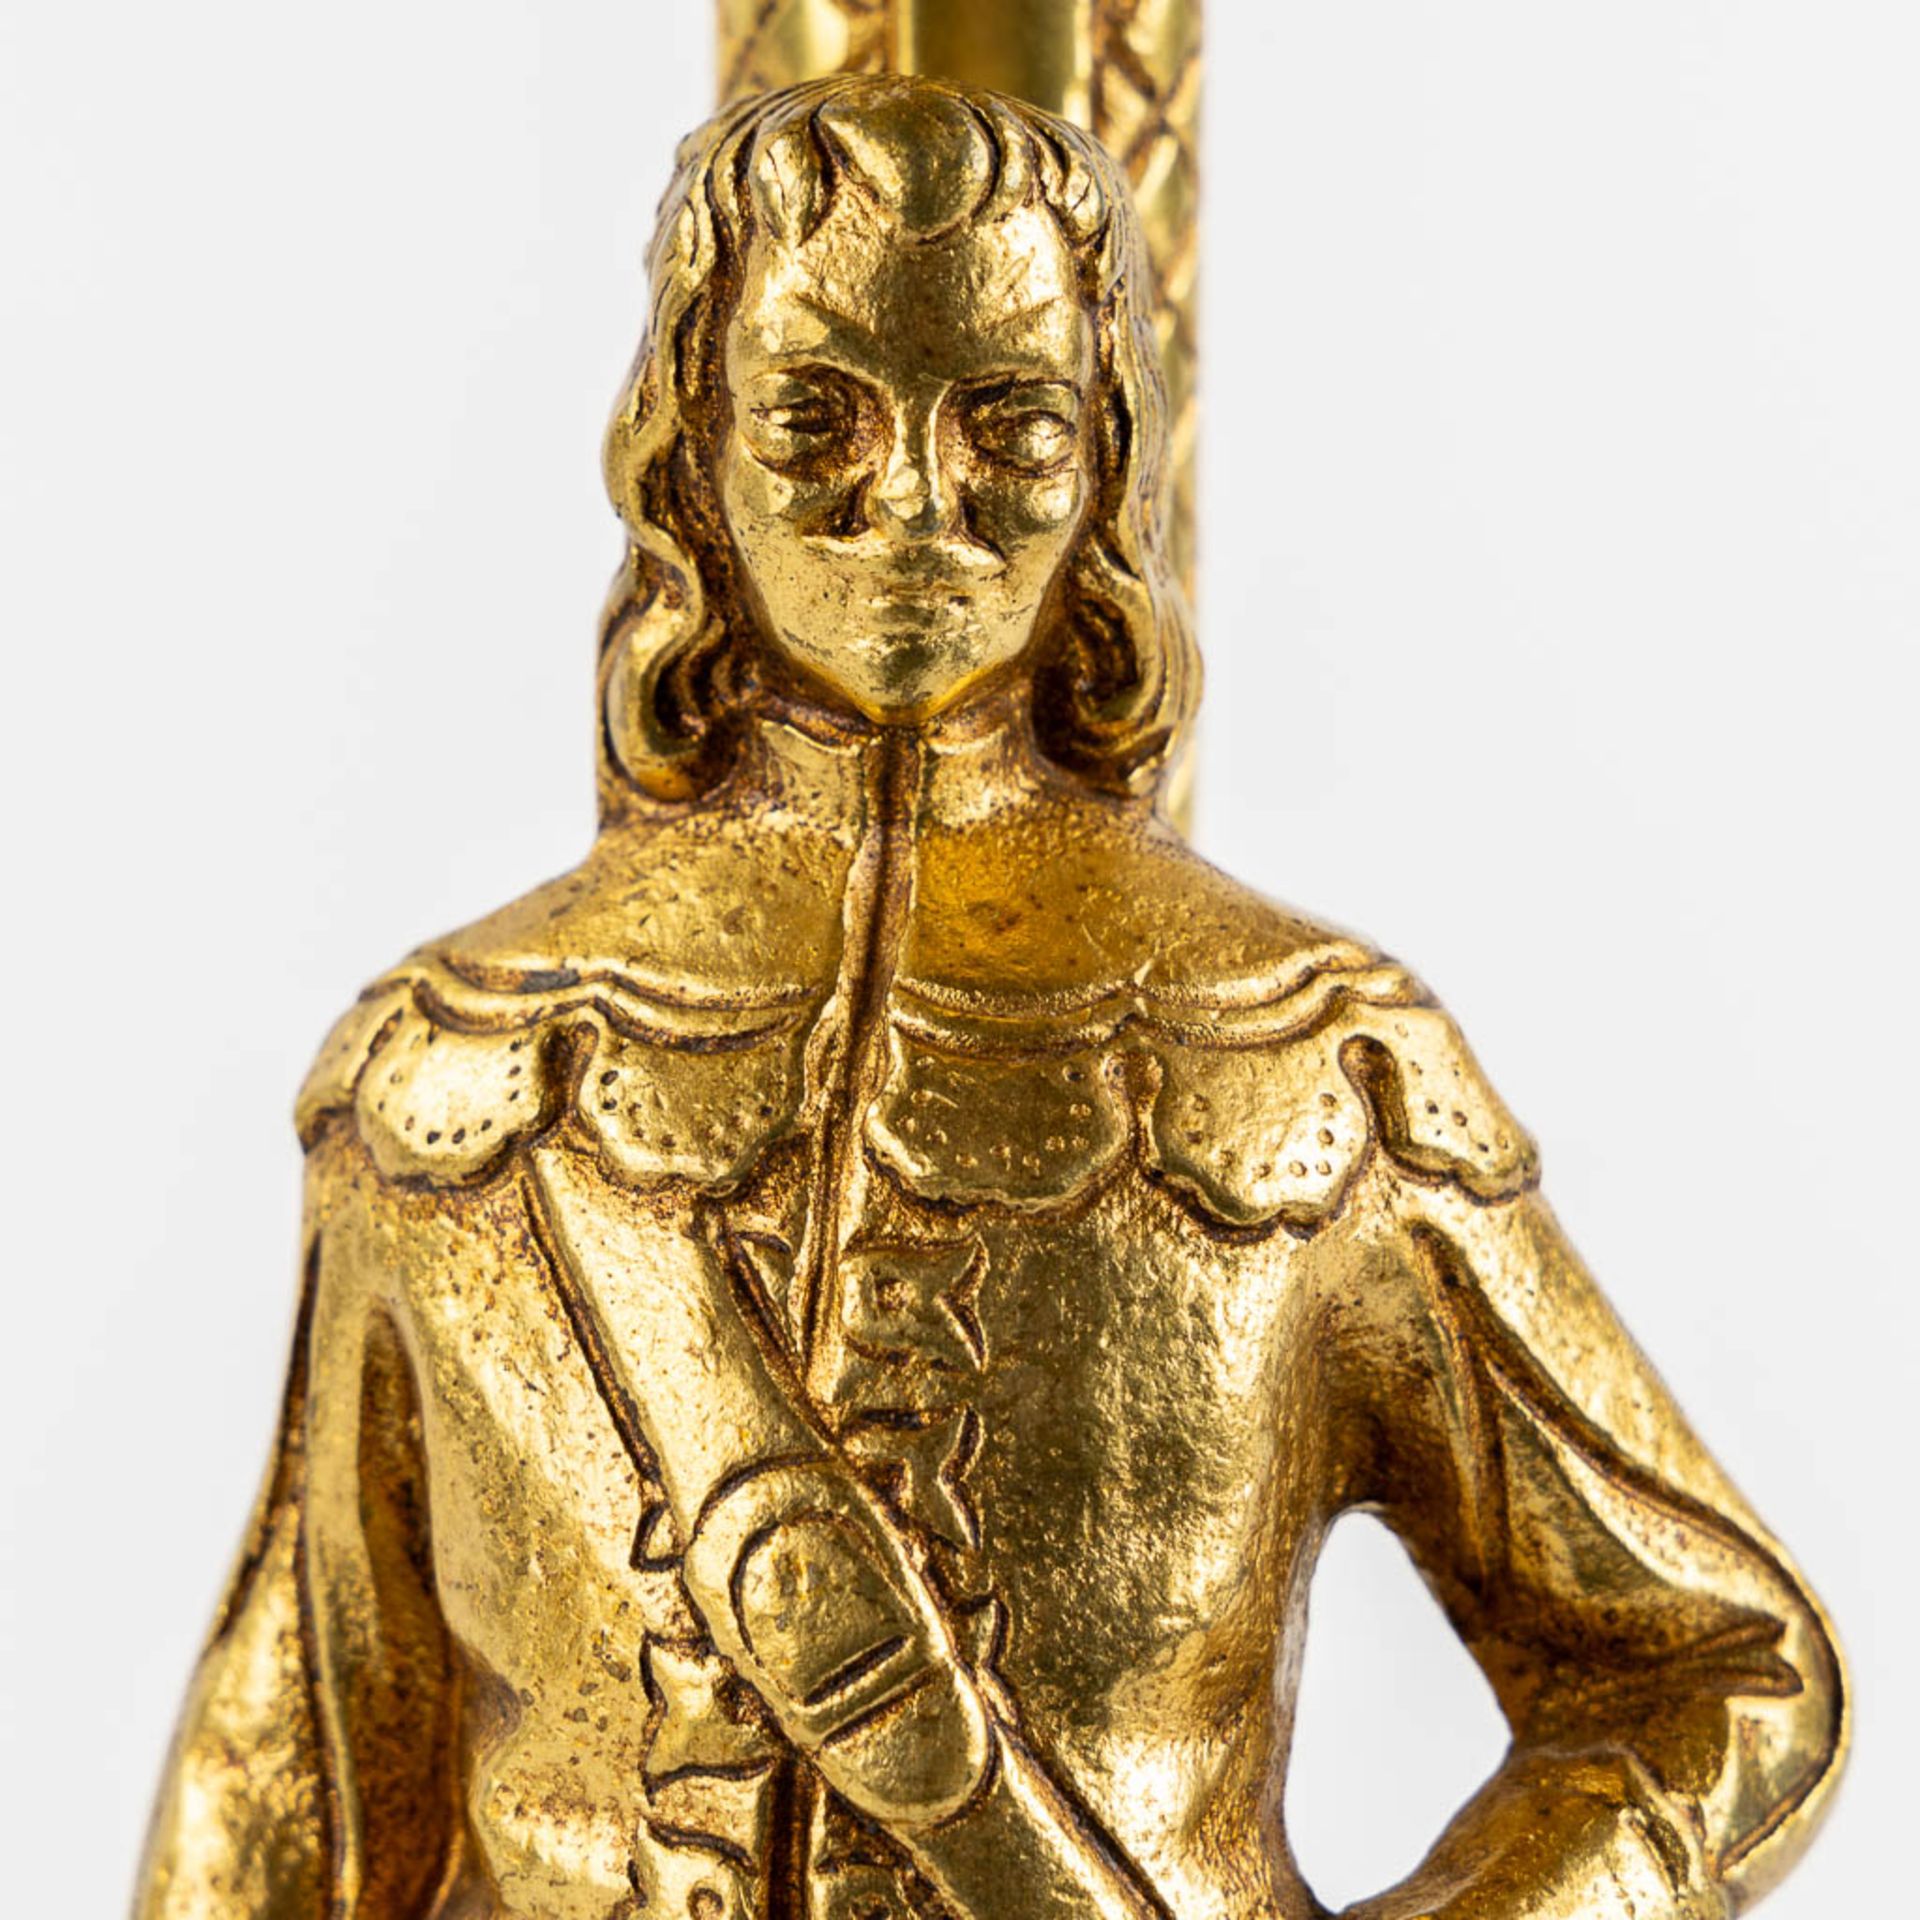 A large and decorative table lamp with a musketeer figurine, gilt bronze. 20th C. (H:61 x D:46 cm) - Image 8 of 11